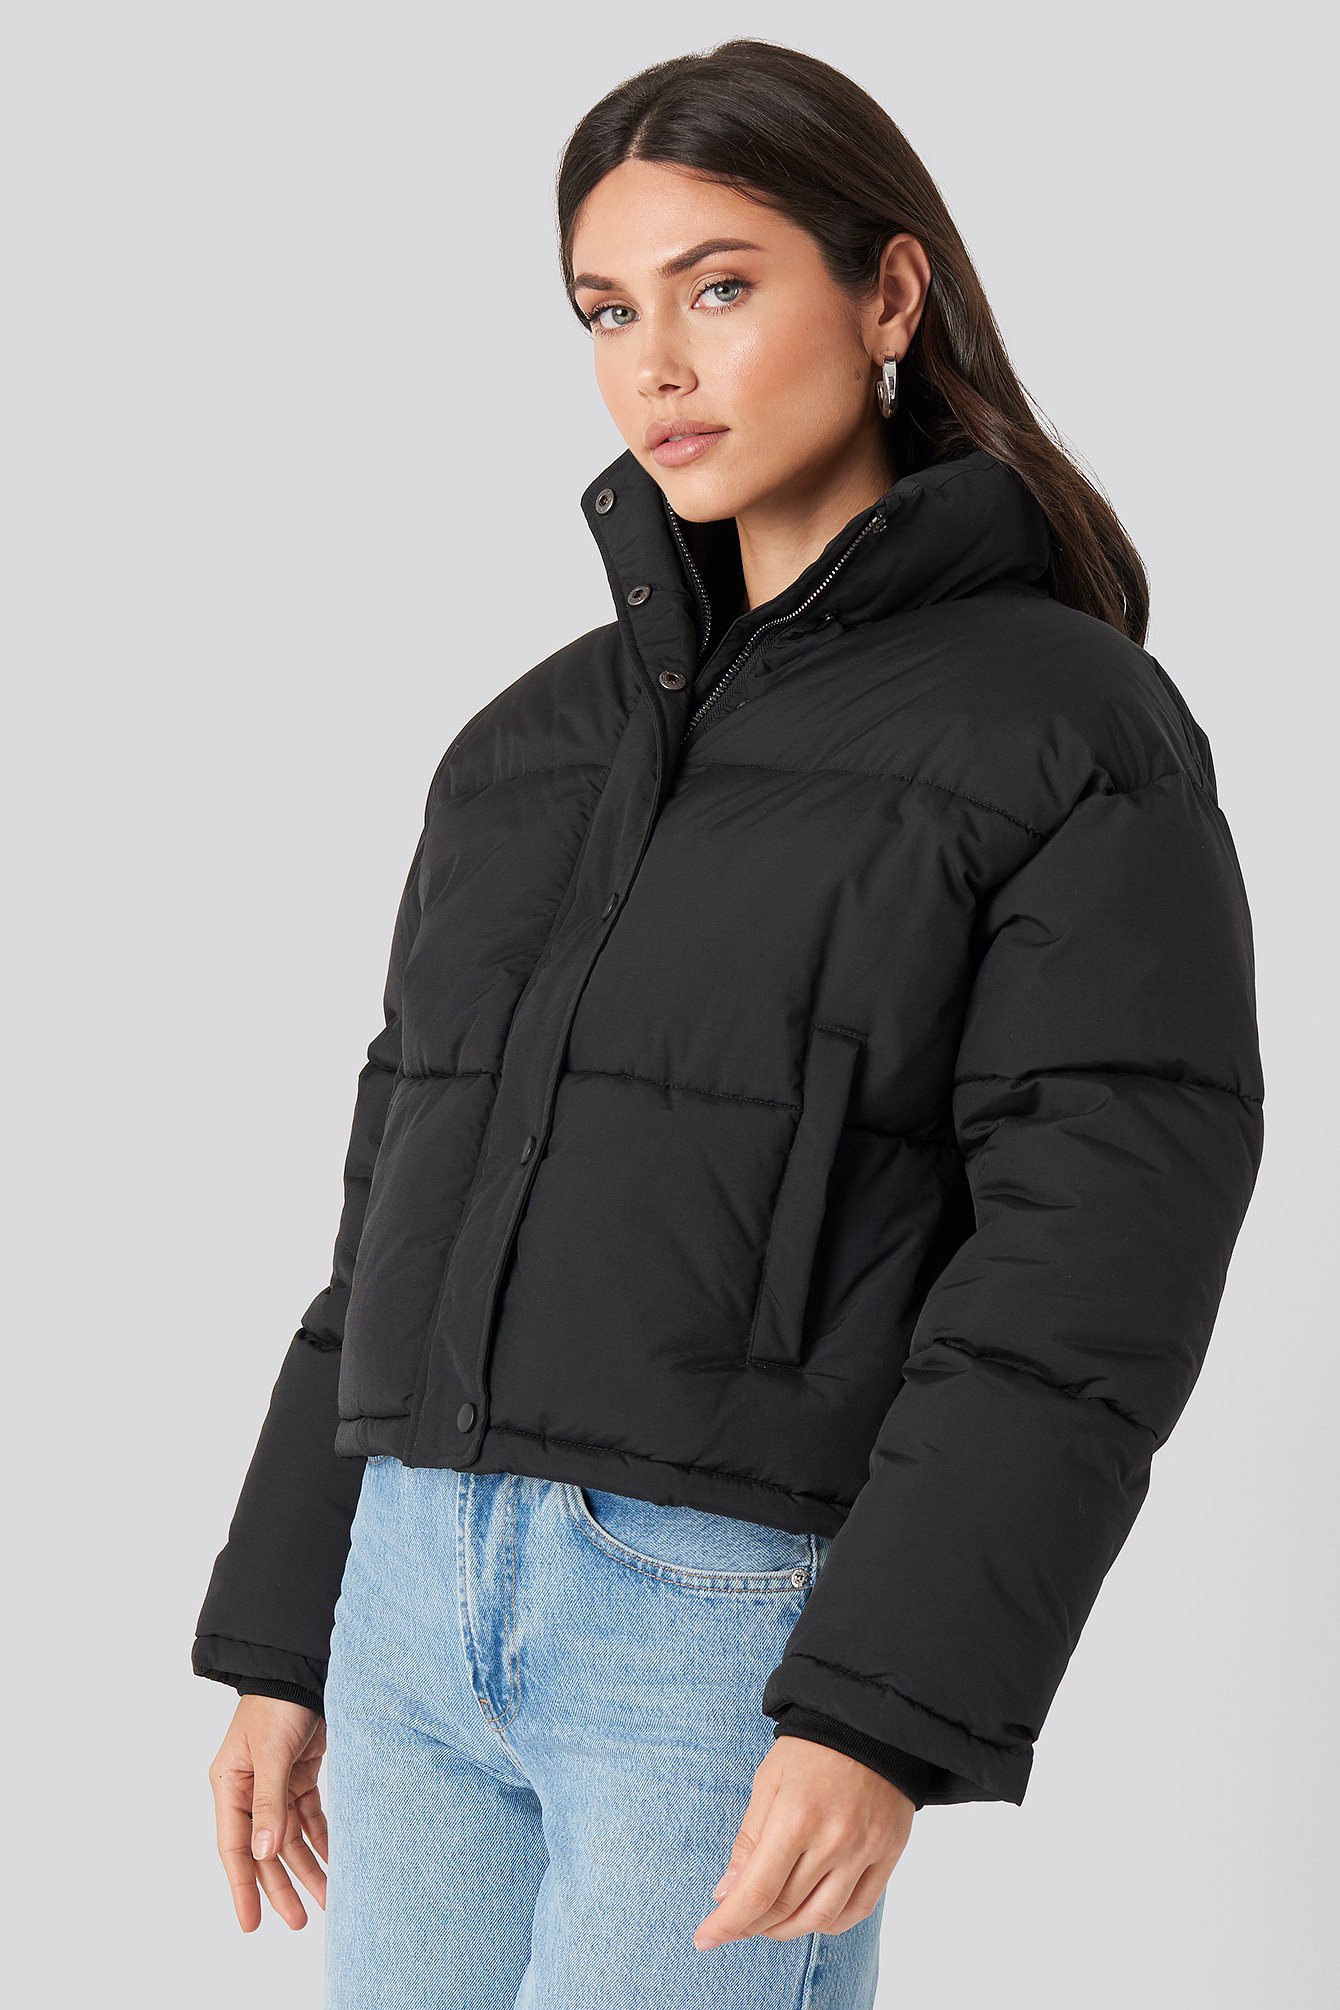 adidas reigning champ down jacket